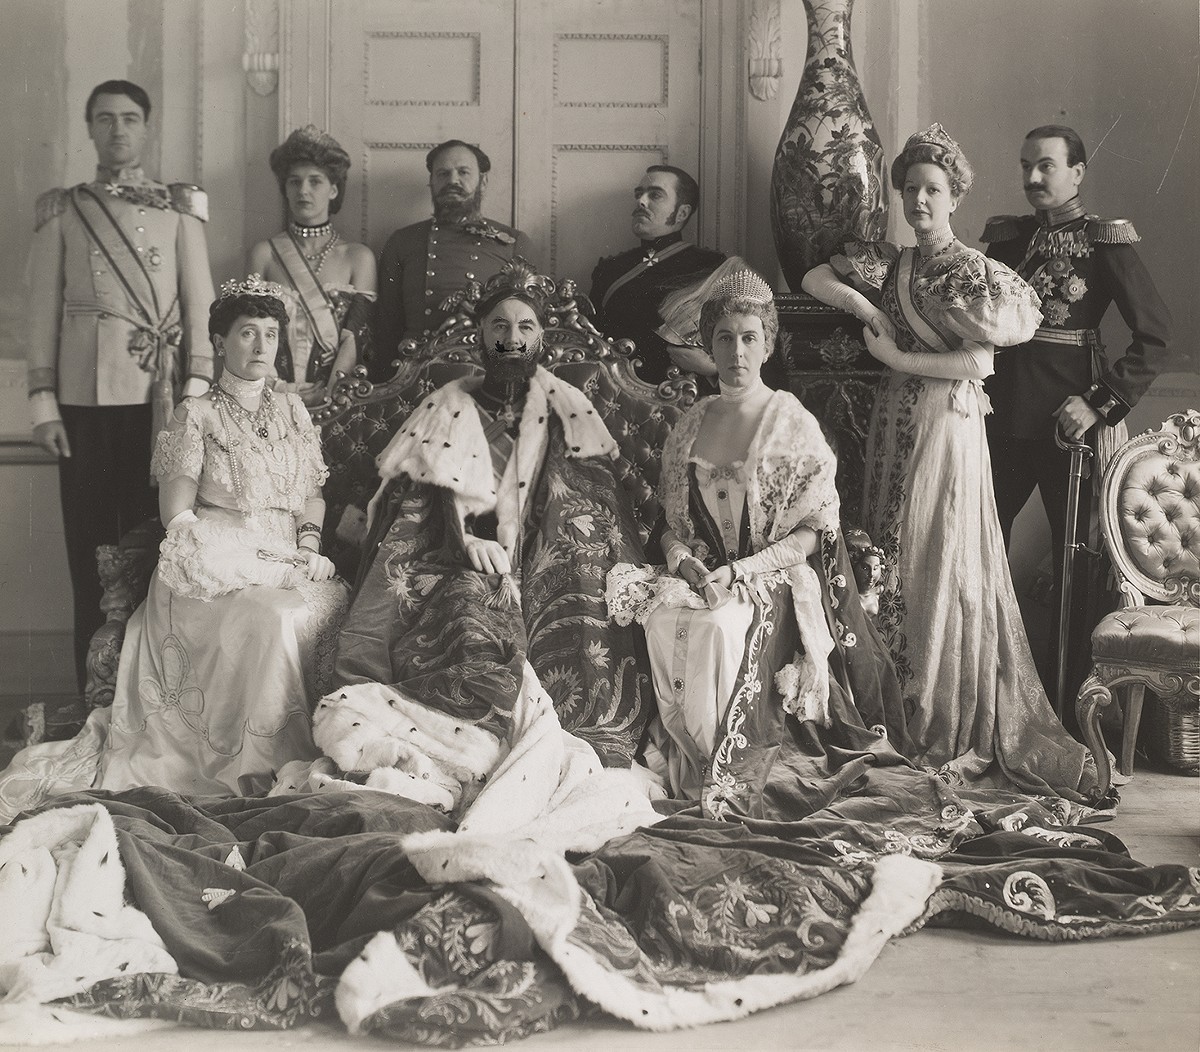 Cecil Beaton, Group portrait including Pussykins, Hildegart, His Imperial Majesty, Ratti, and other characters, from the first edition of the spoof memoir, My Royal Past, 1939. Gift of Robert L. B. Tobin.